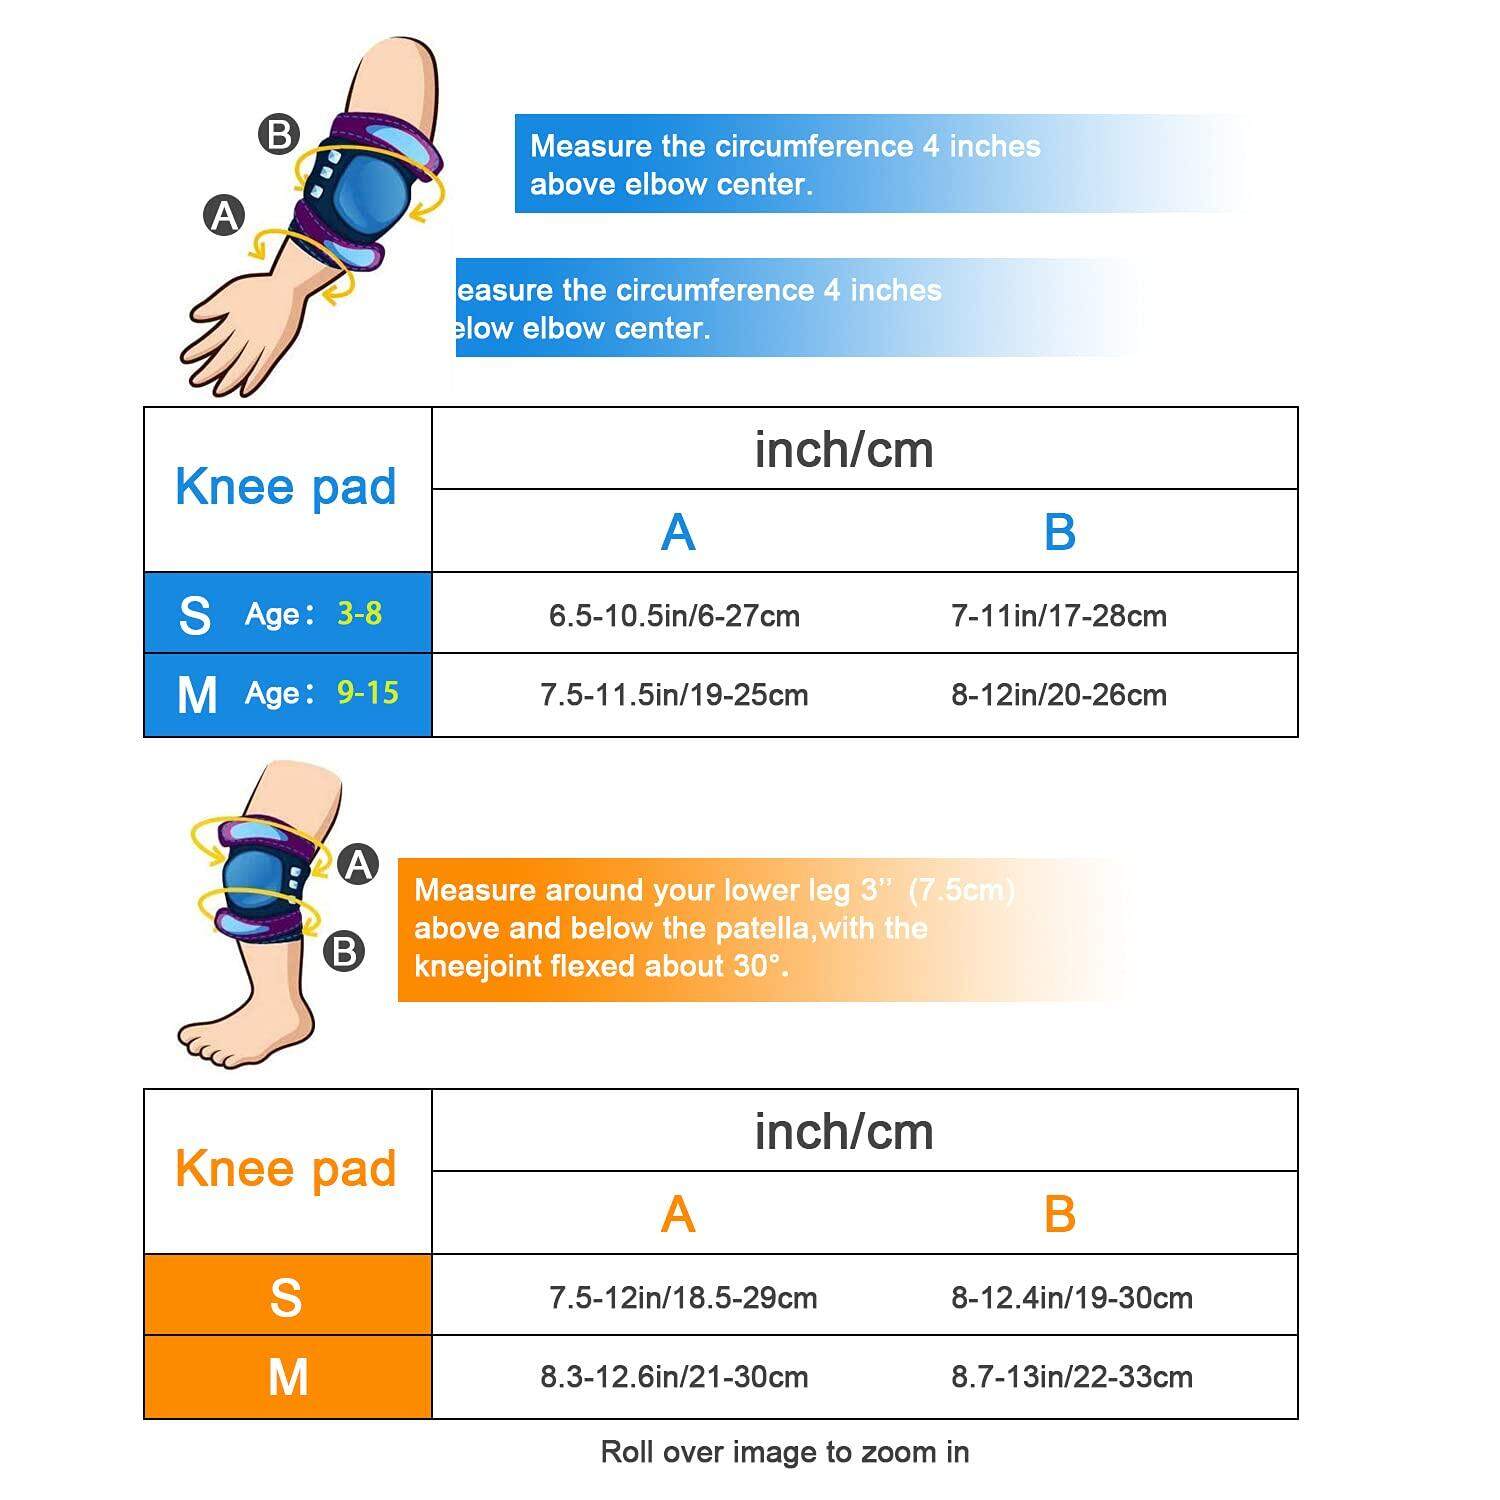 XJD Kids Protective Gear Set Girls Boys Toddler Knee Pad Elbow Pads Guards Wrist Guards for Skateboard Cycling BMX Bike Scooter Rollerblade Roller Skates Age 3-13 